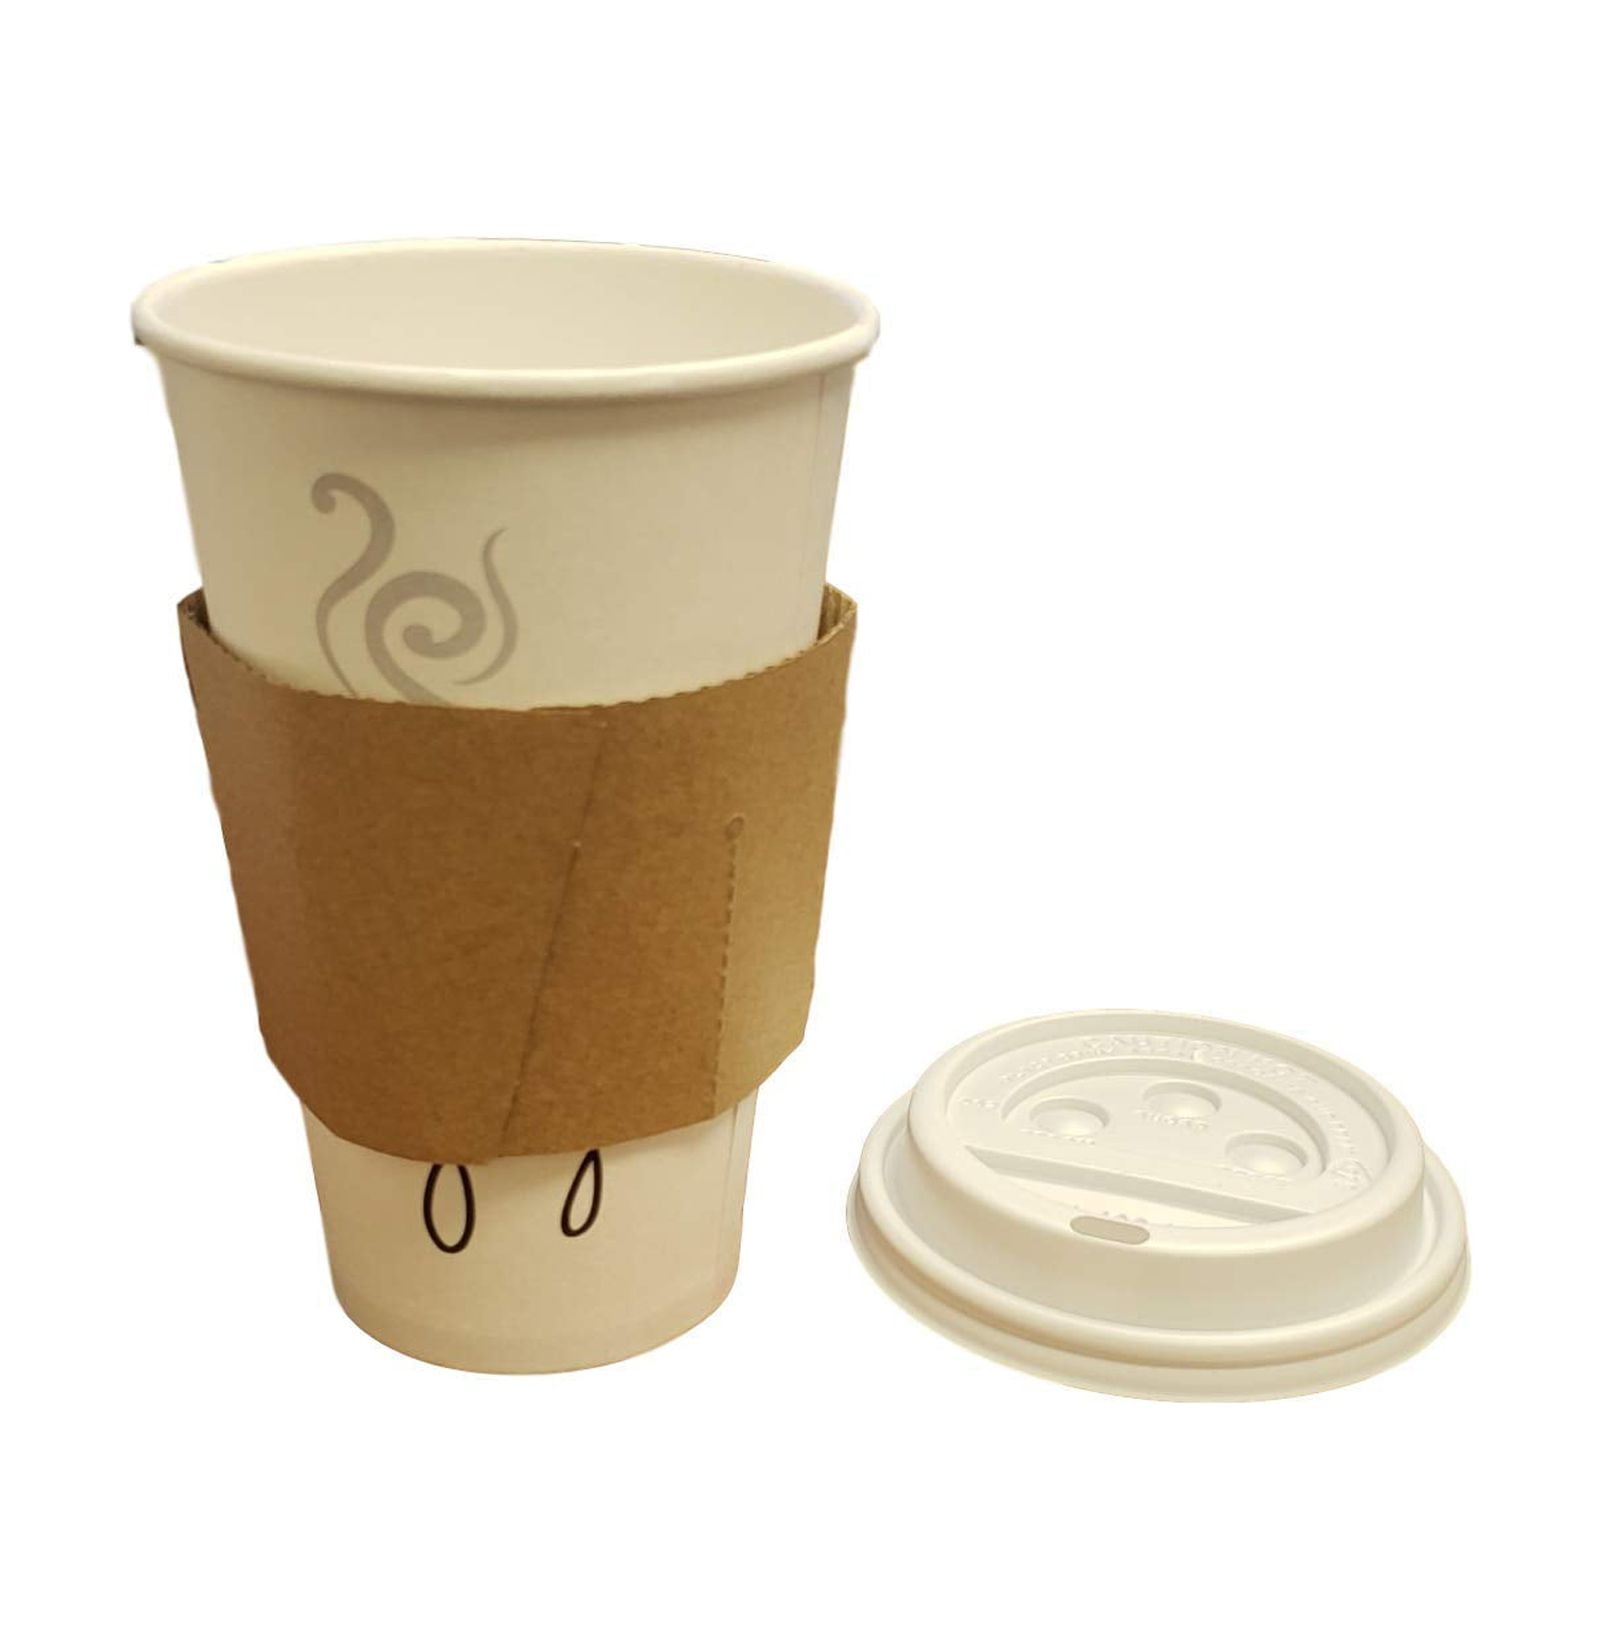 Home Basics 16 oz. 4-Pack of Reusable Plastic Coffee Cups With Lids, Brown  $5.00 EACH, CASE PACK OF 28